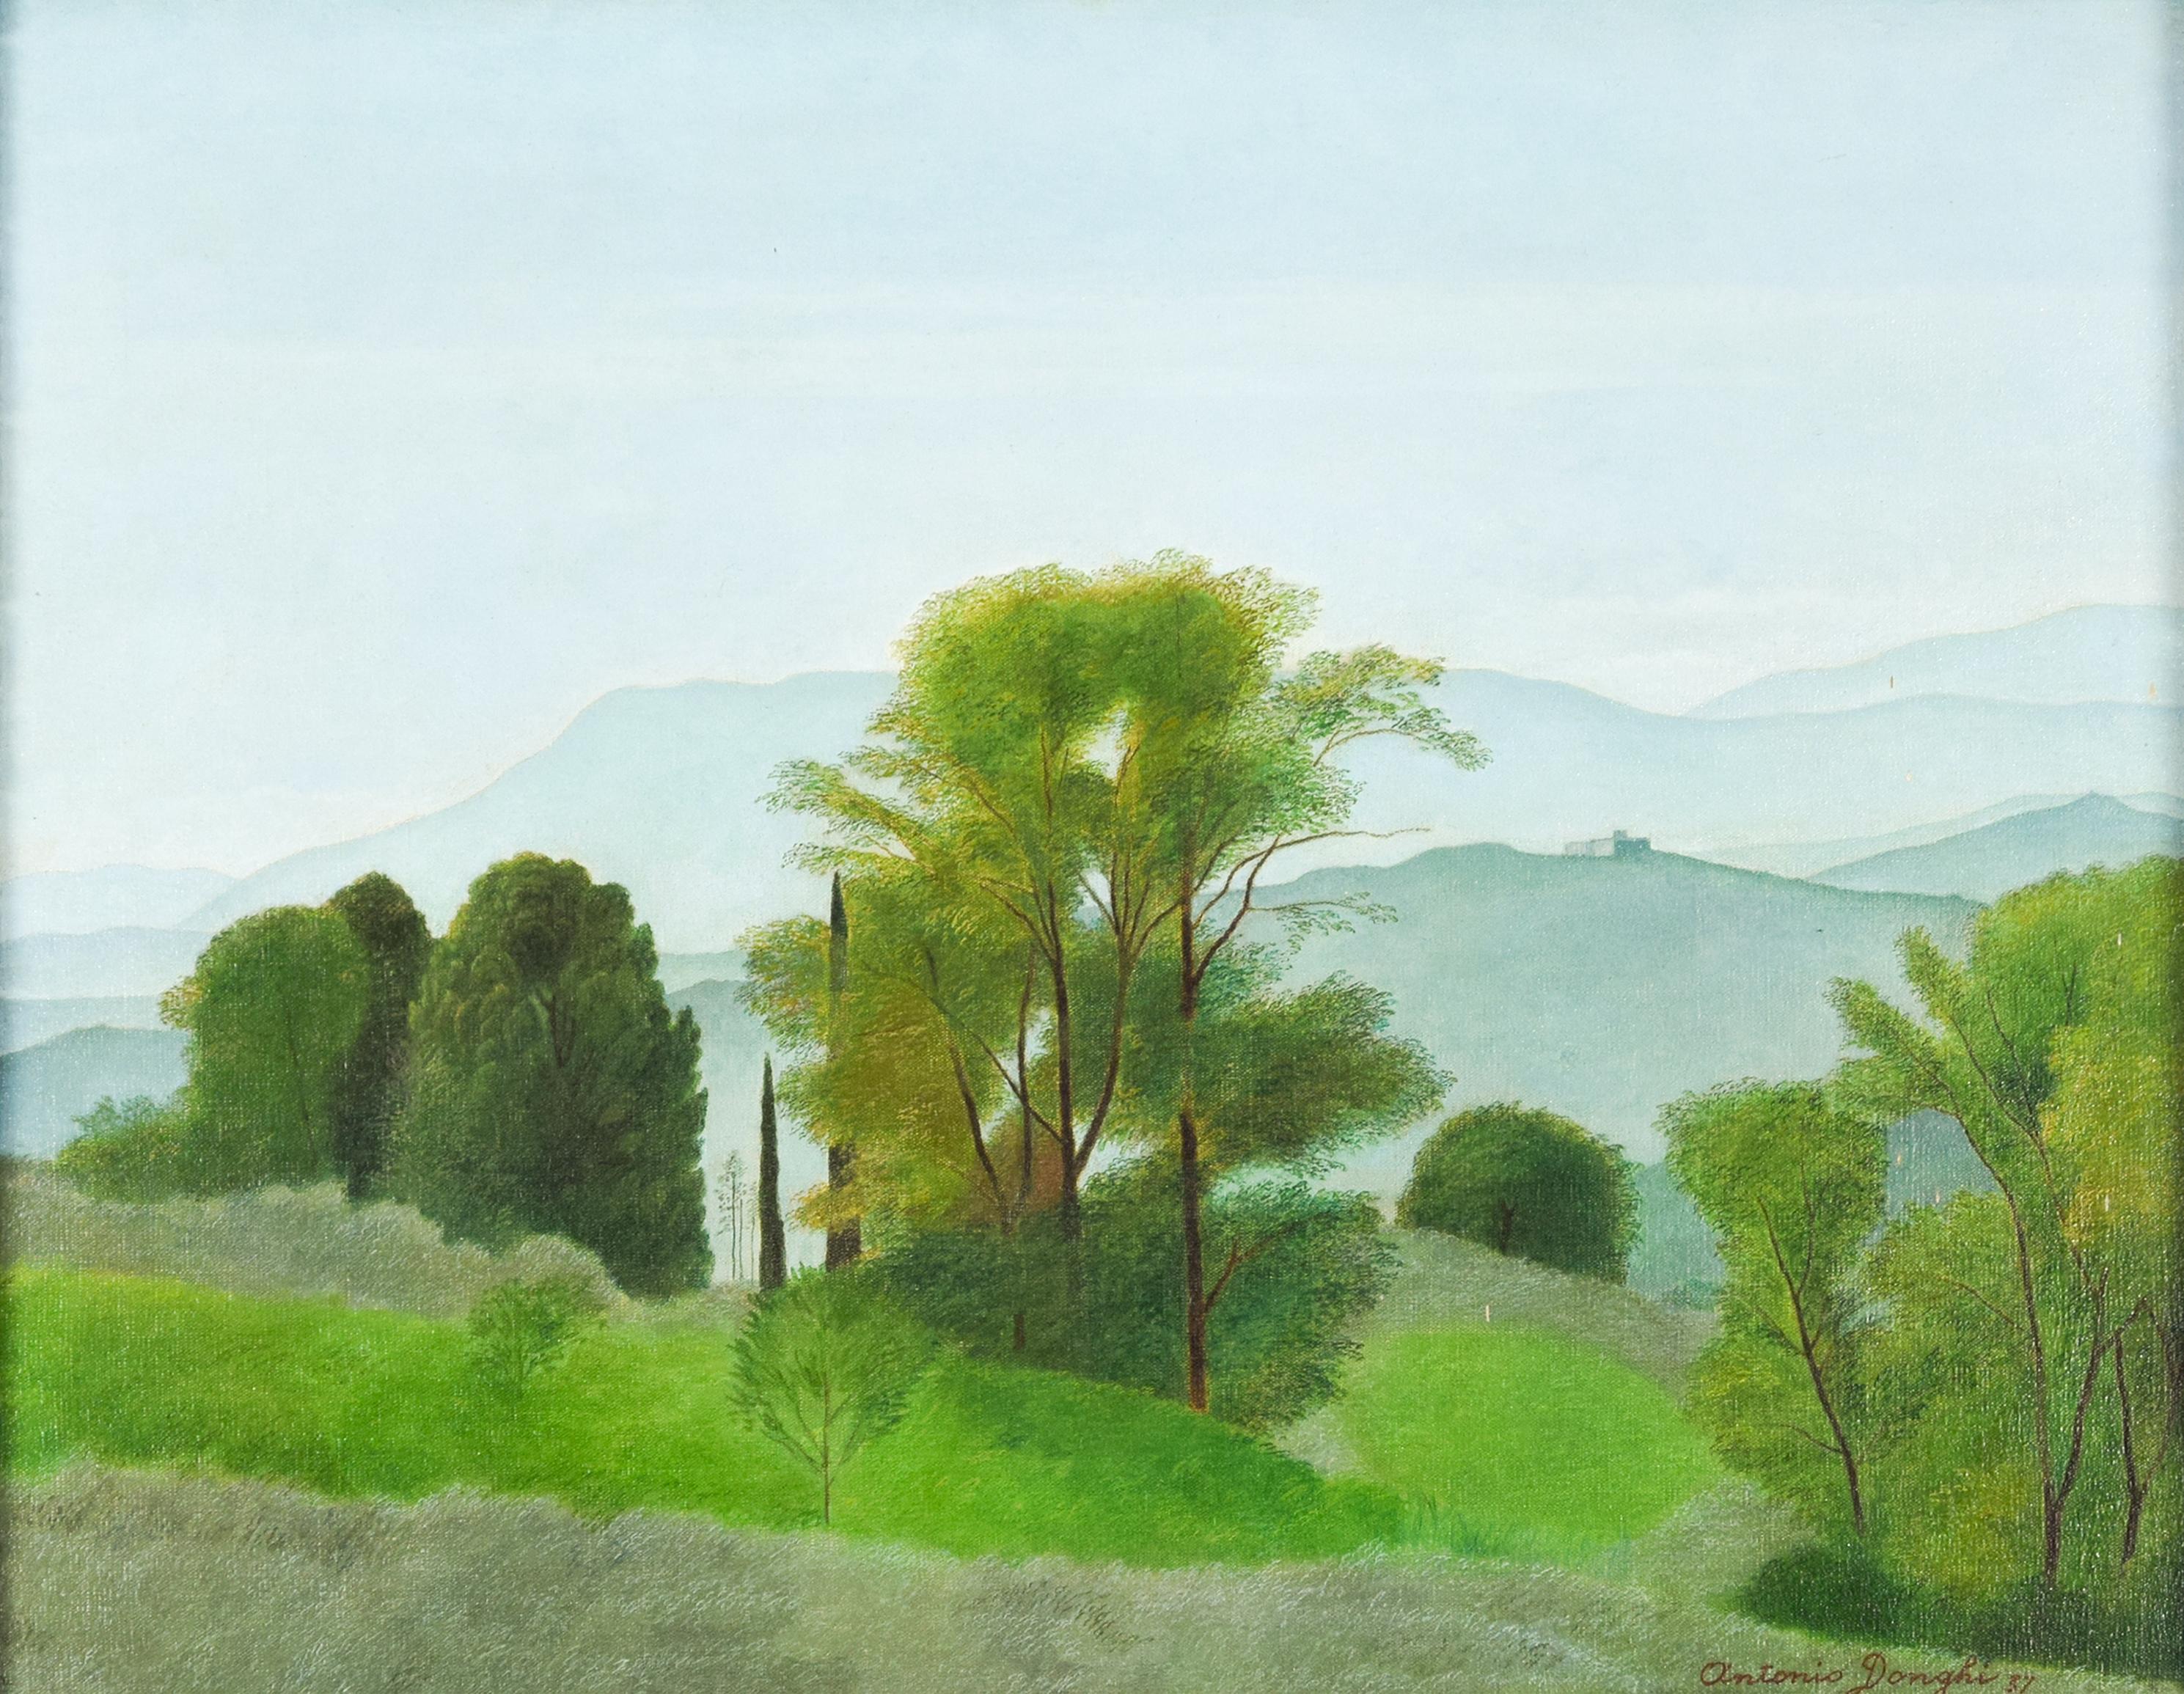 Landscape - Oil on Canvas by A. Donghi - 1937